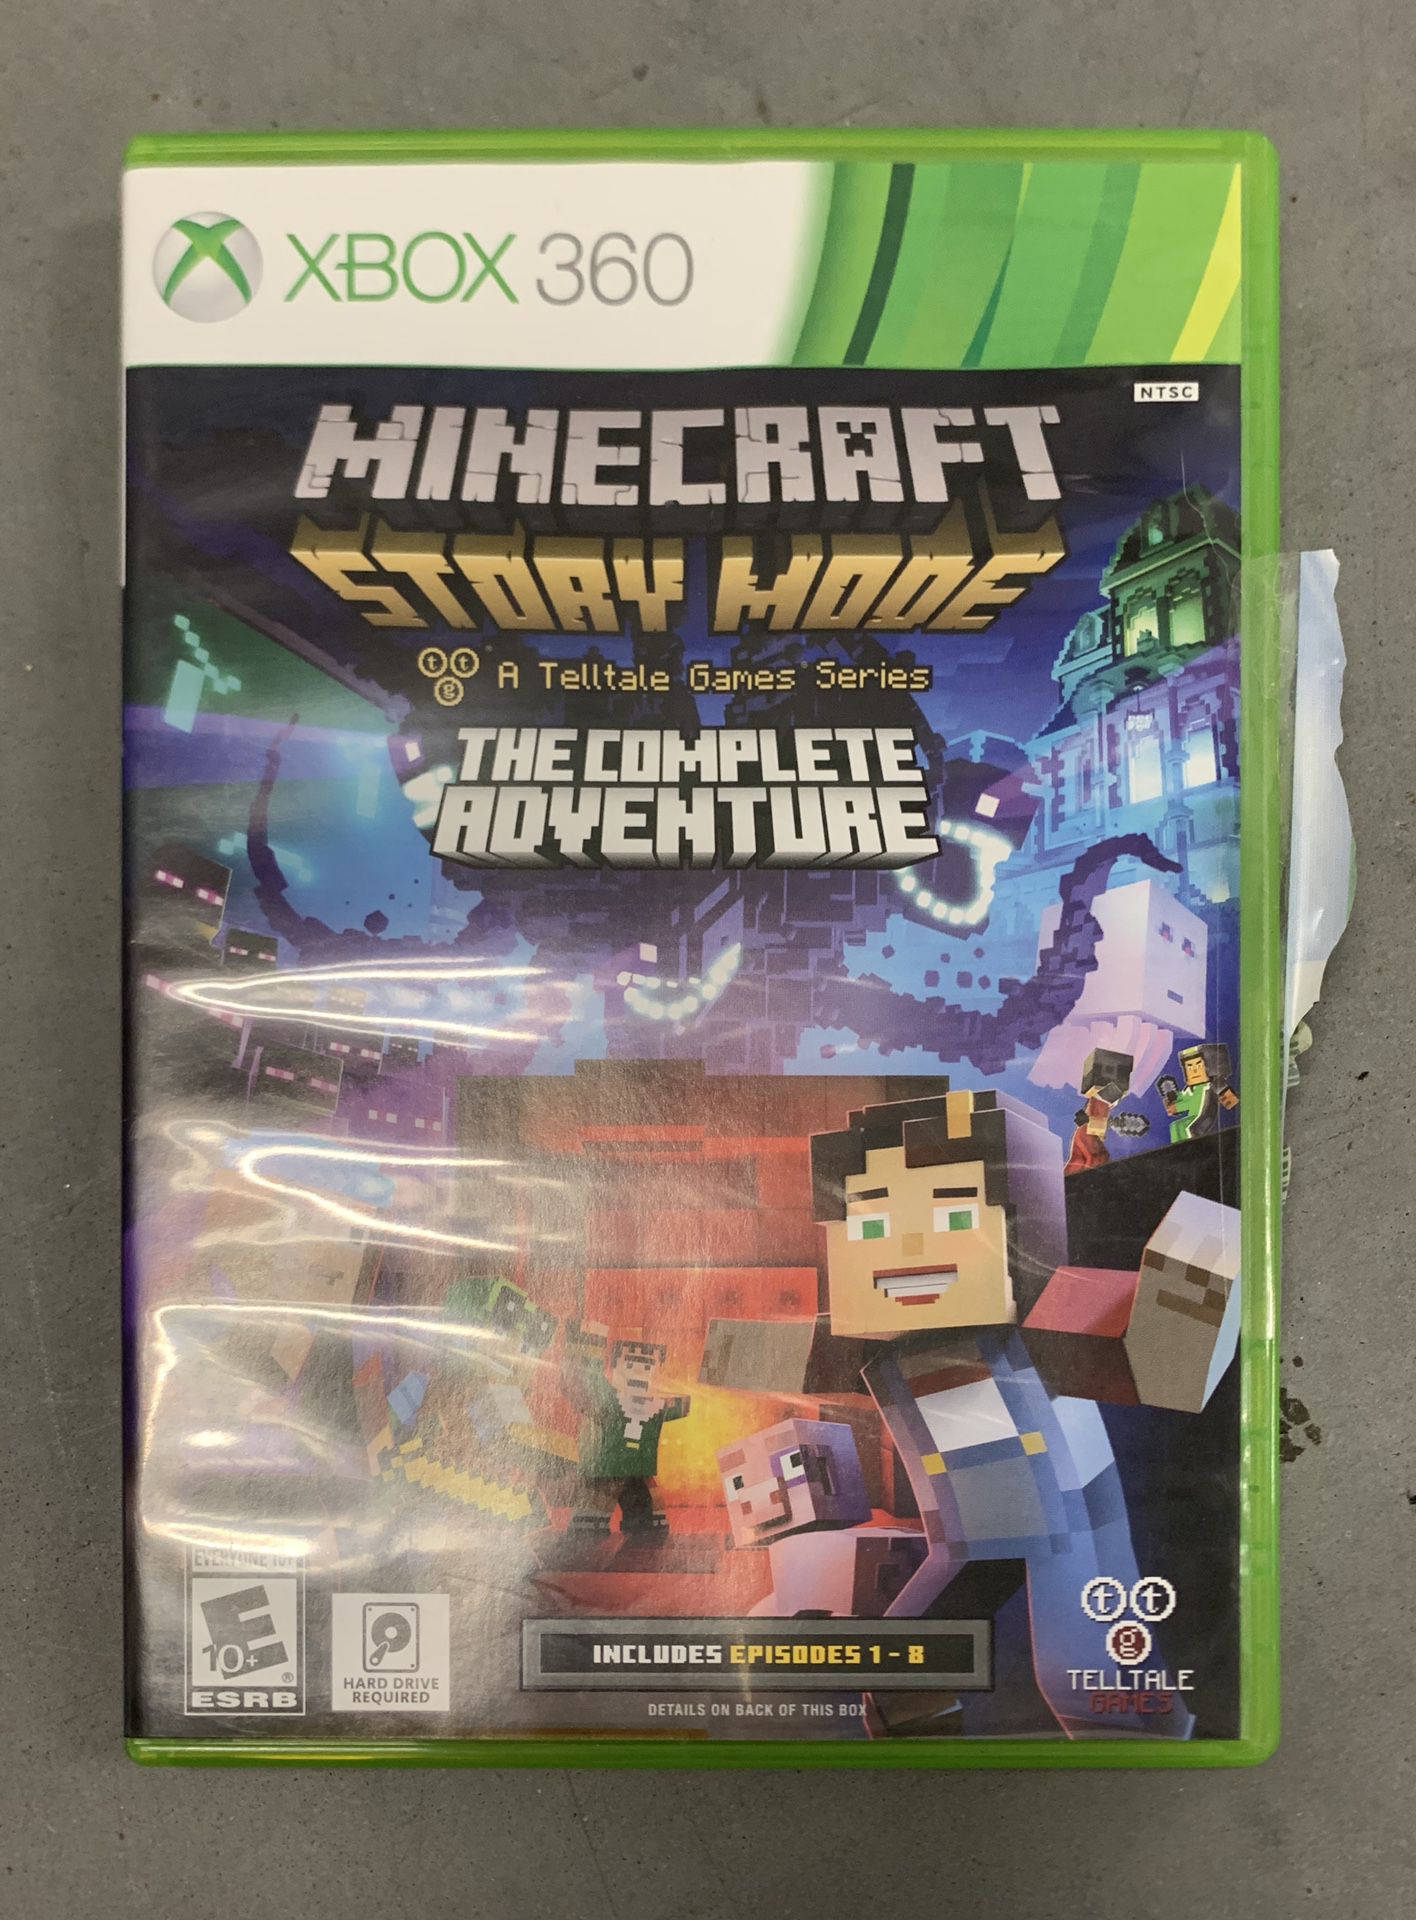 Xbox 360 Minecraft Story Mode The Complete Adventure Episodes 1-8 Video Game